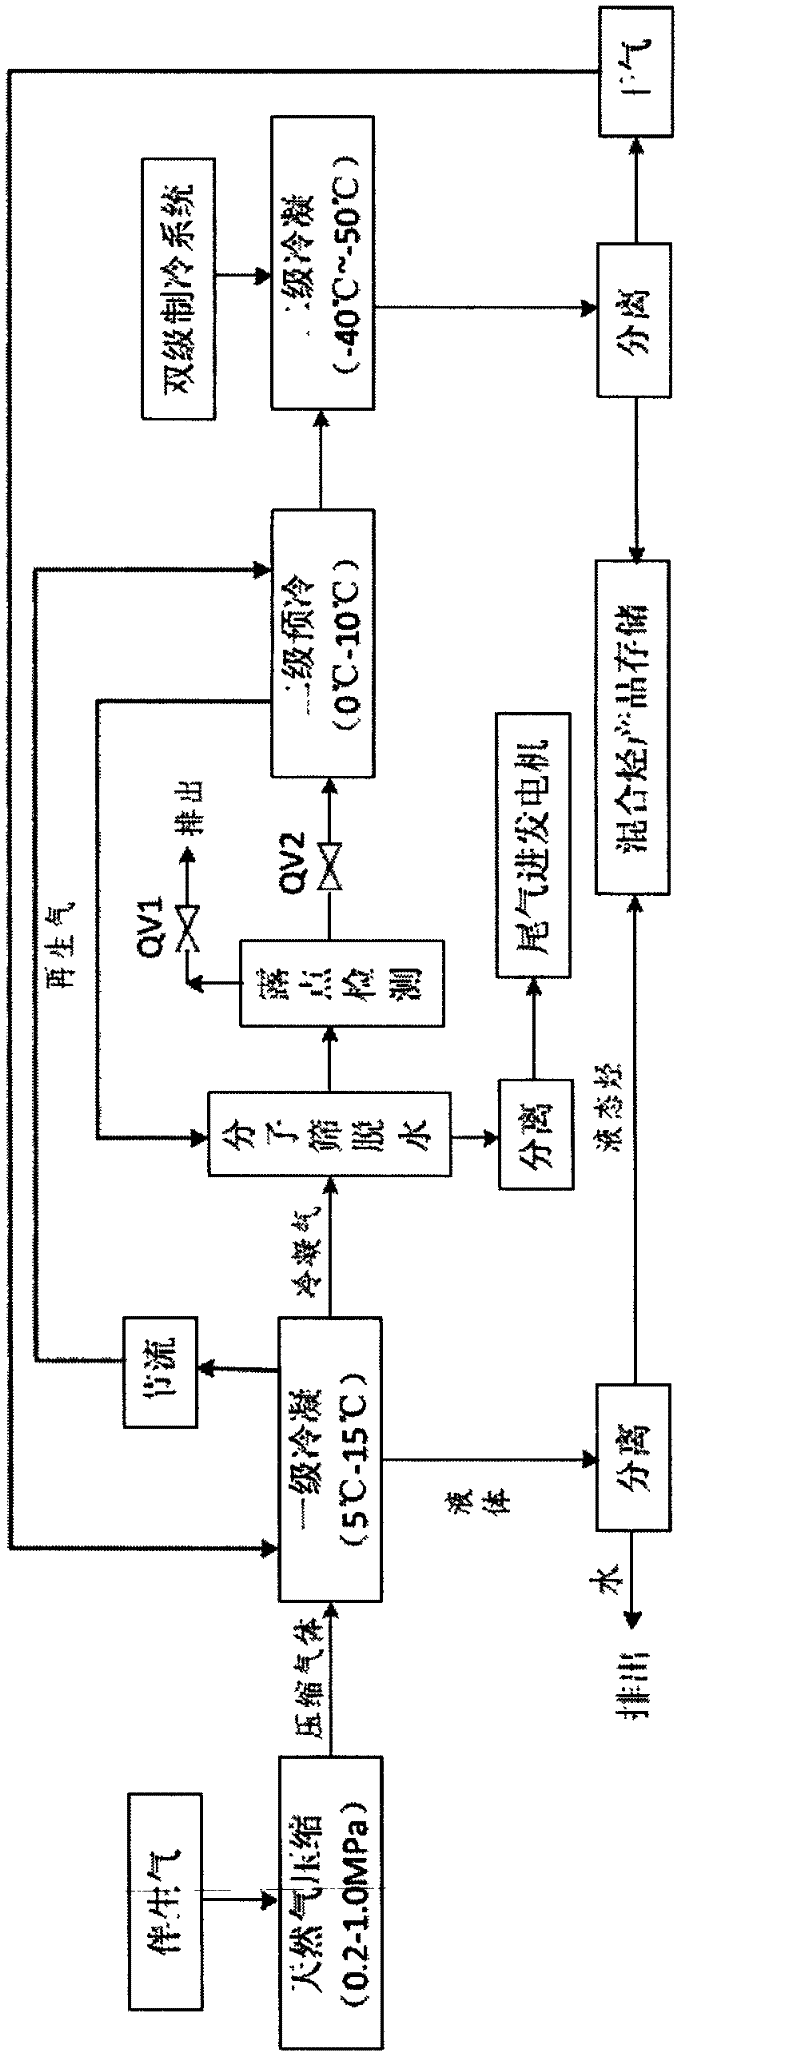 Method and equipment for recovery of oilfield associated gas hydrocarbon mixture